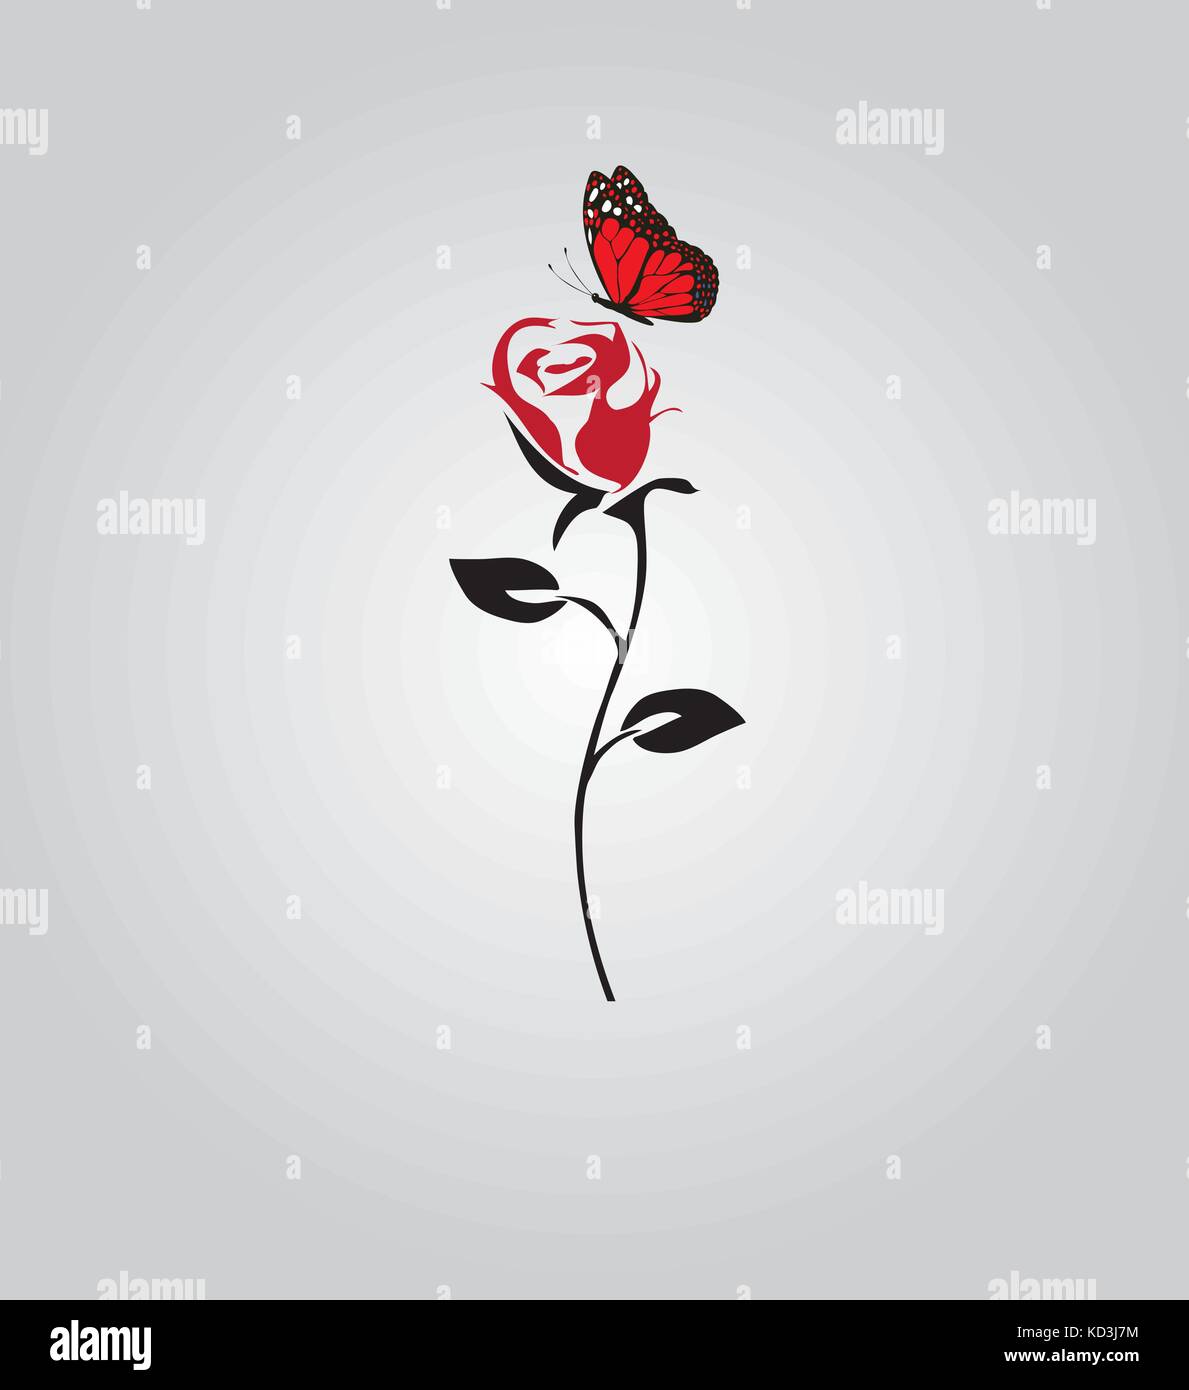 vector illustration of a rose silhouette with red butterfly. Stock Vector